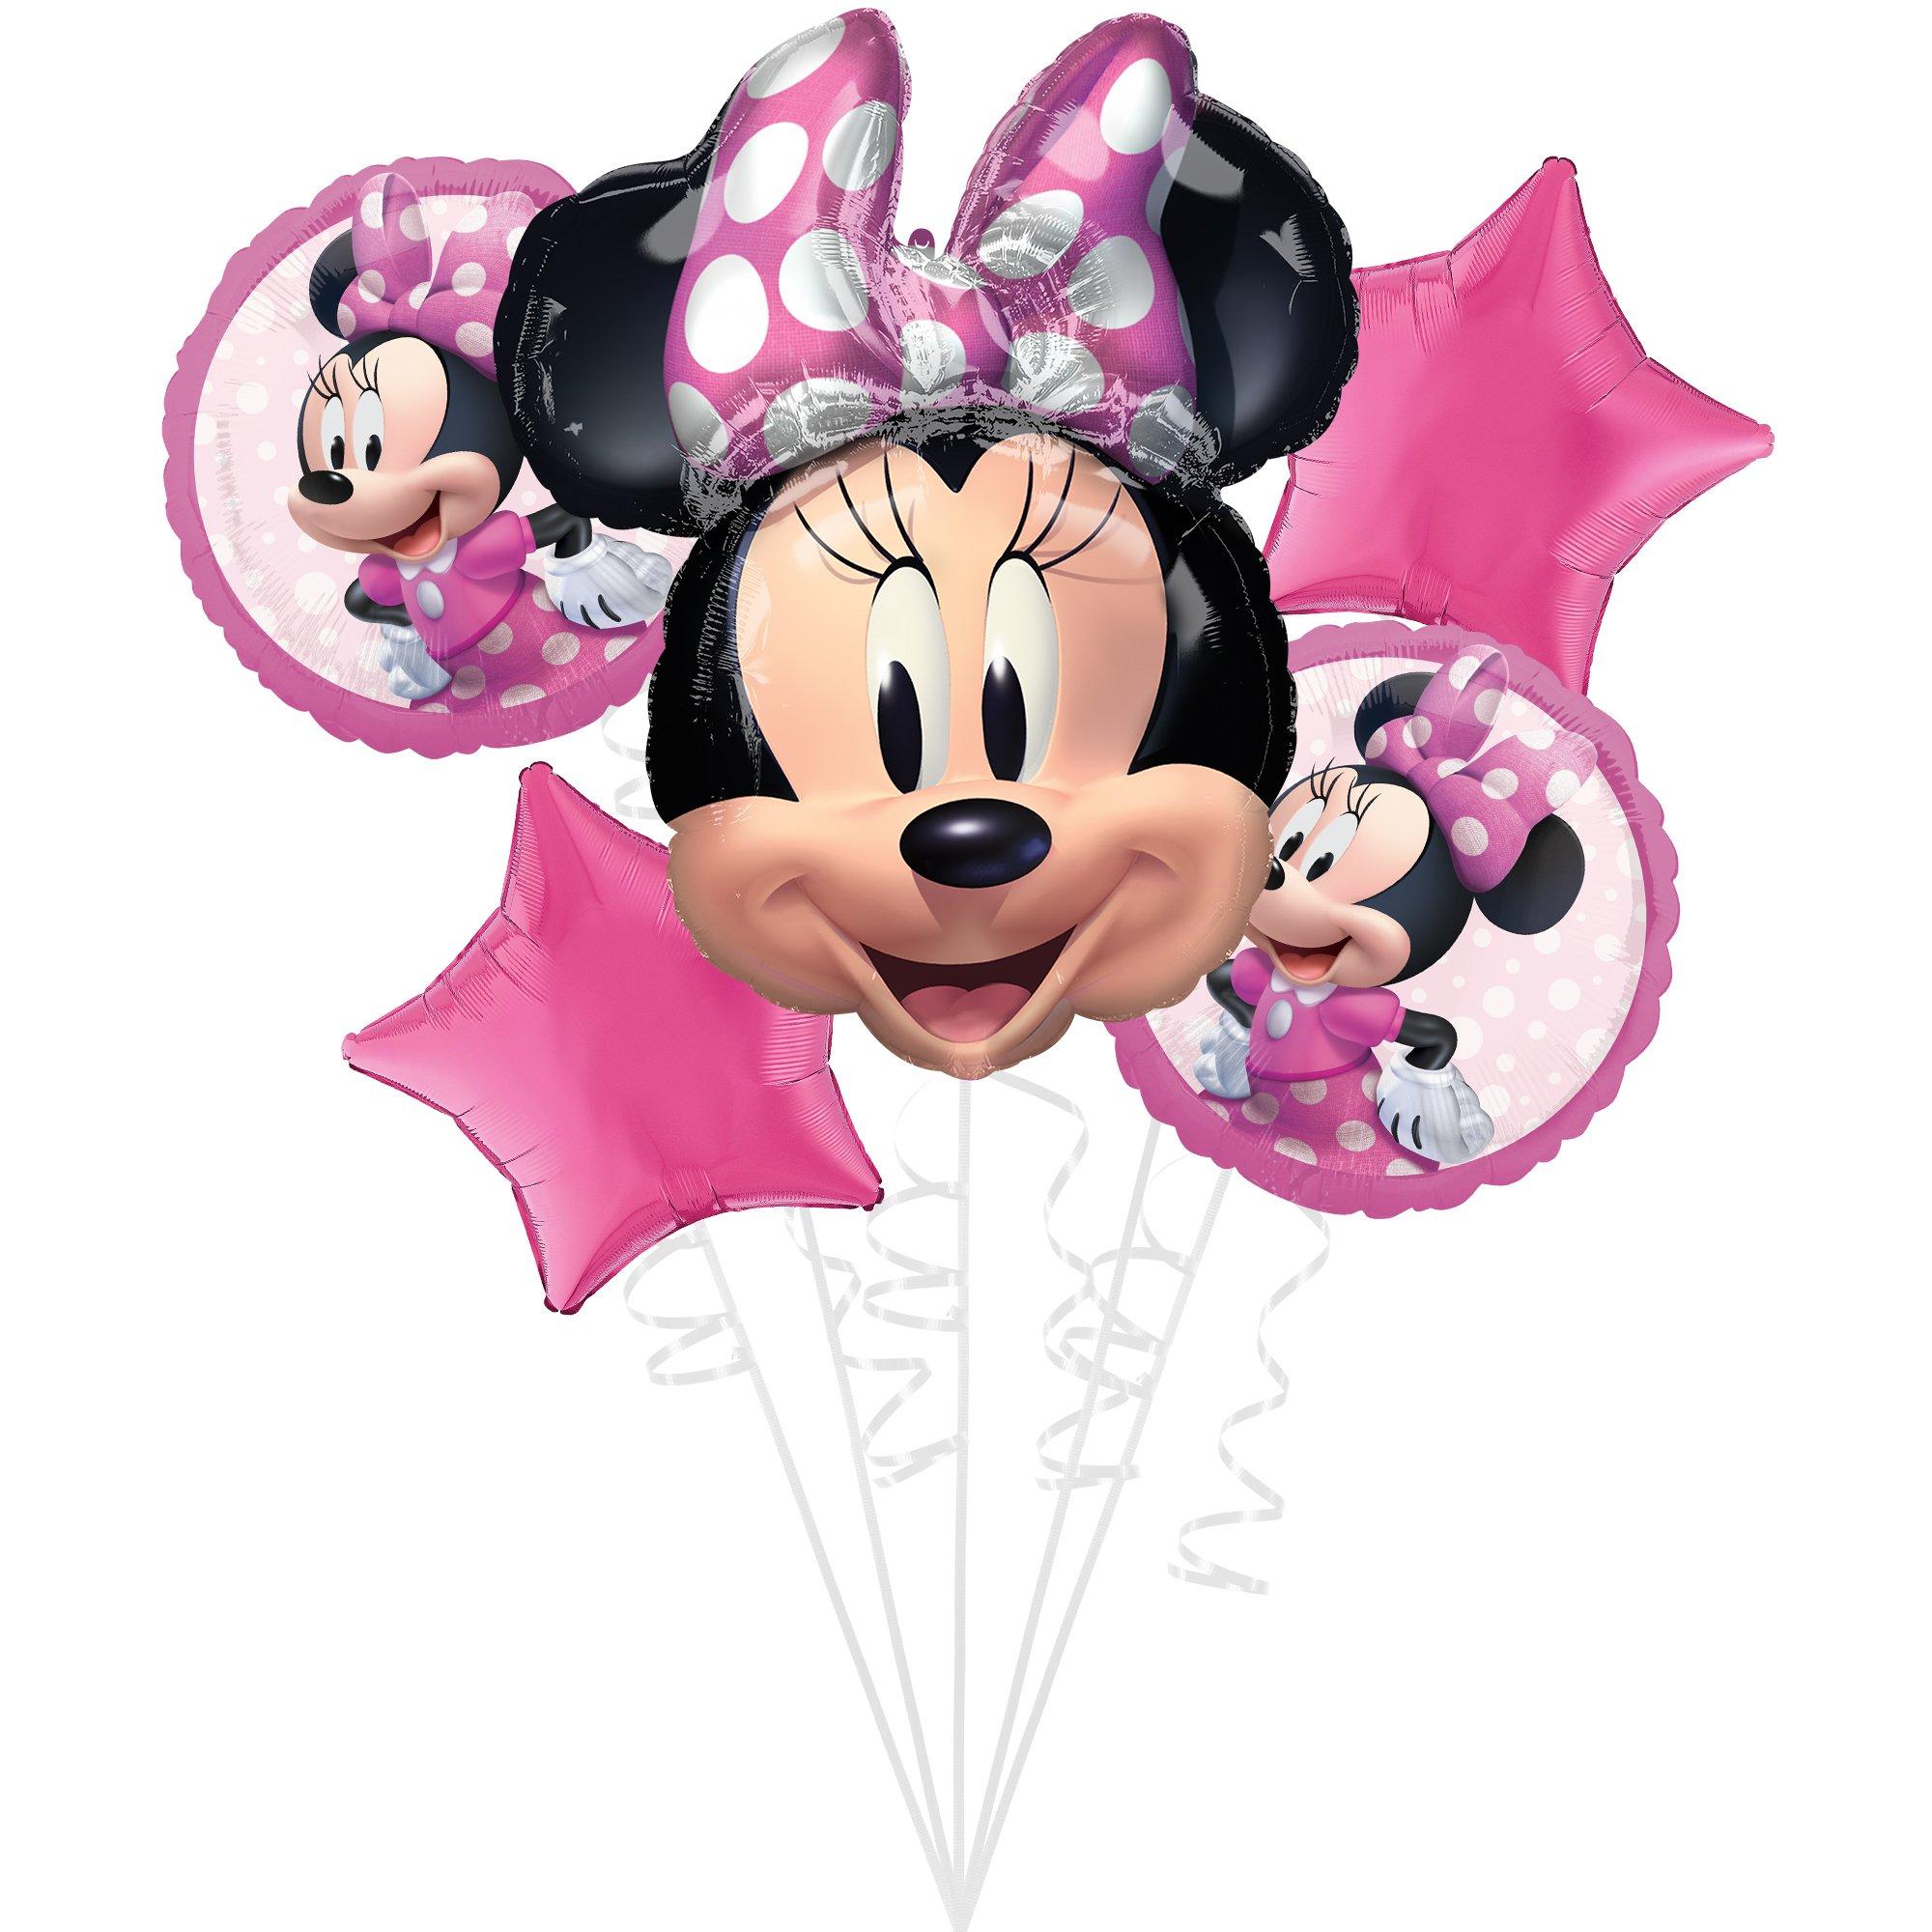 Seminarie Uitsluiten Email schrijven Minnie Mouse Forever Balloon Bouquet 5pc | Party City